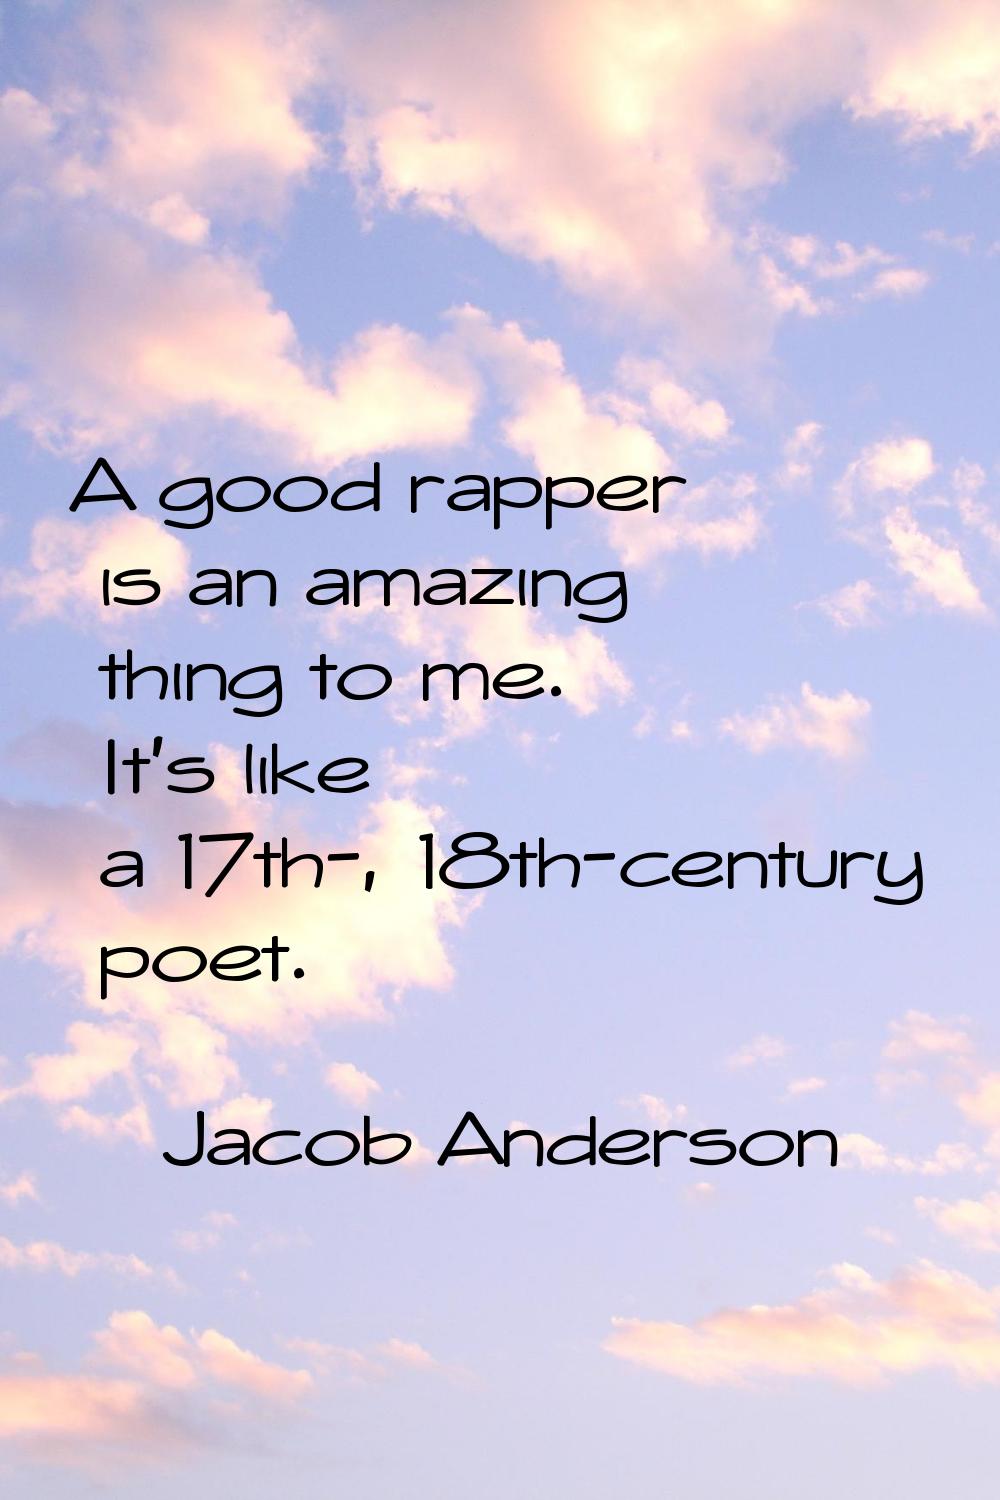 A good rapper is an amazing thing to me. It's like a 17th-, 18th-century poet.